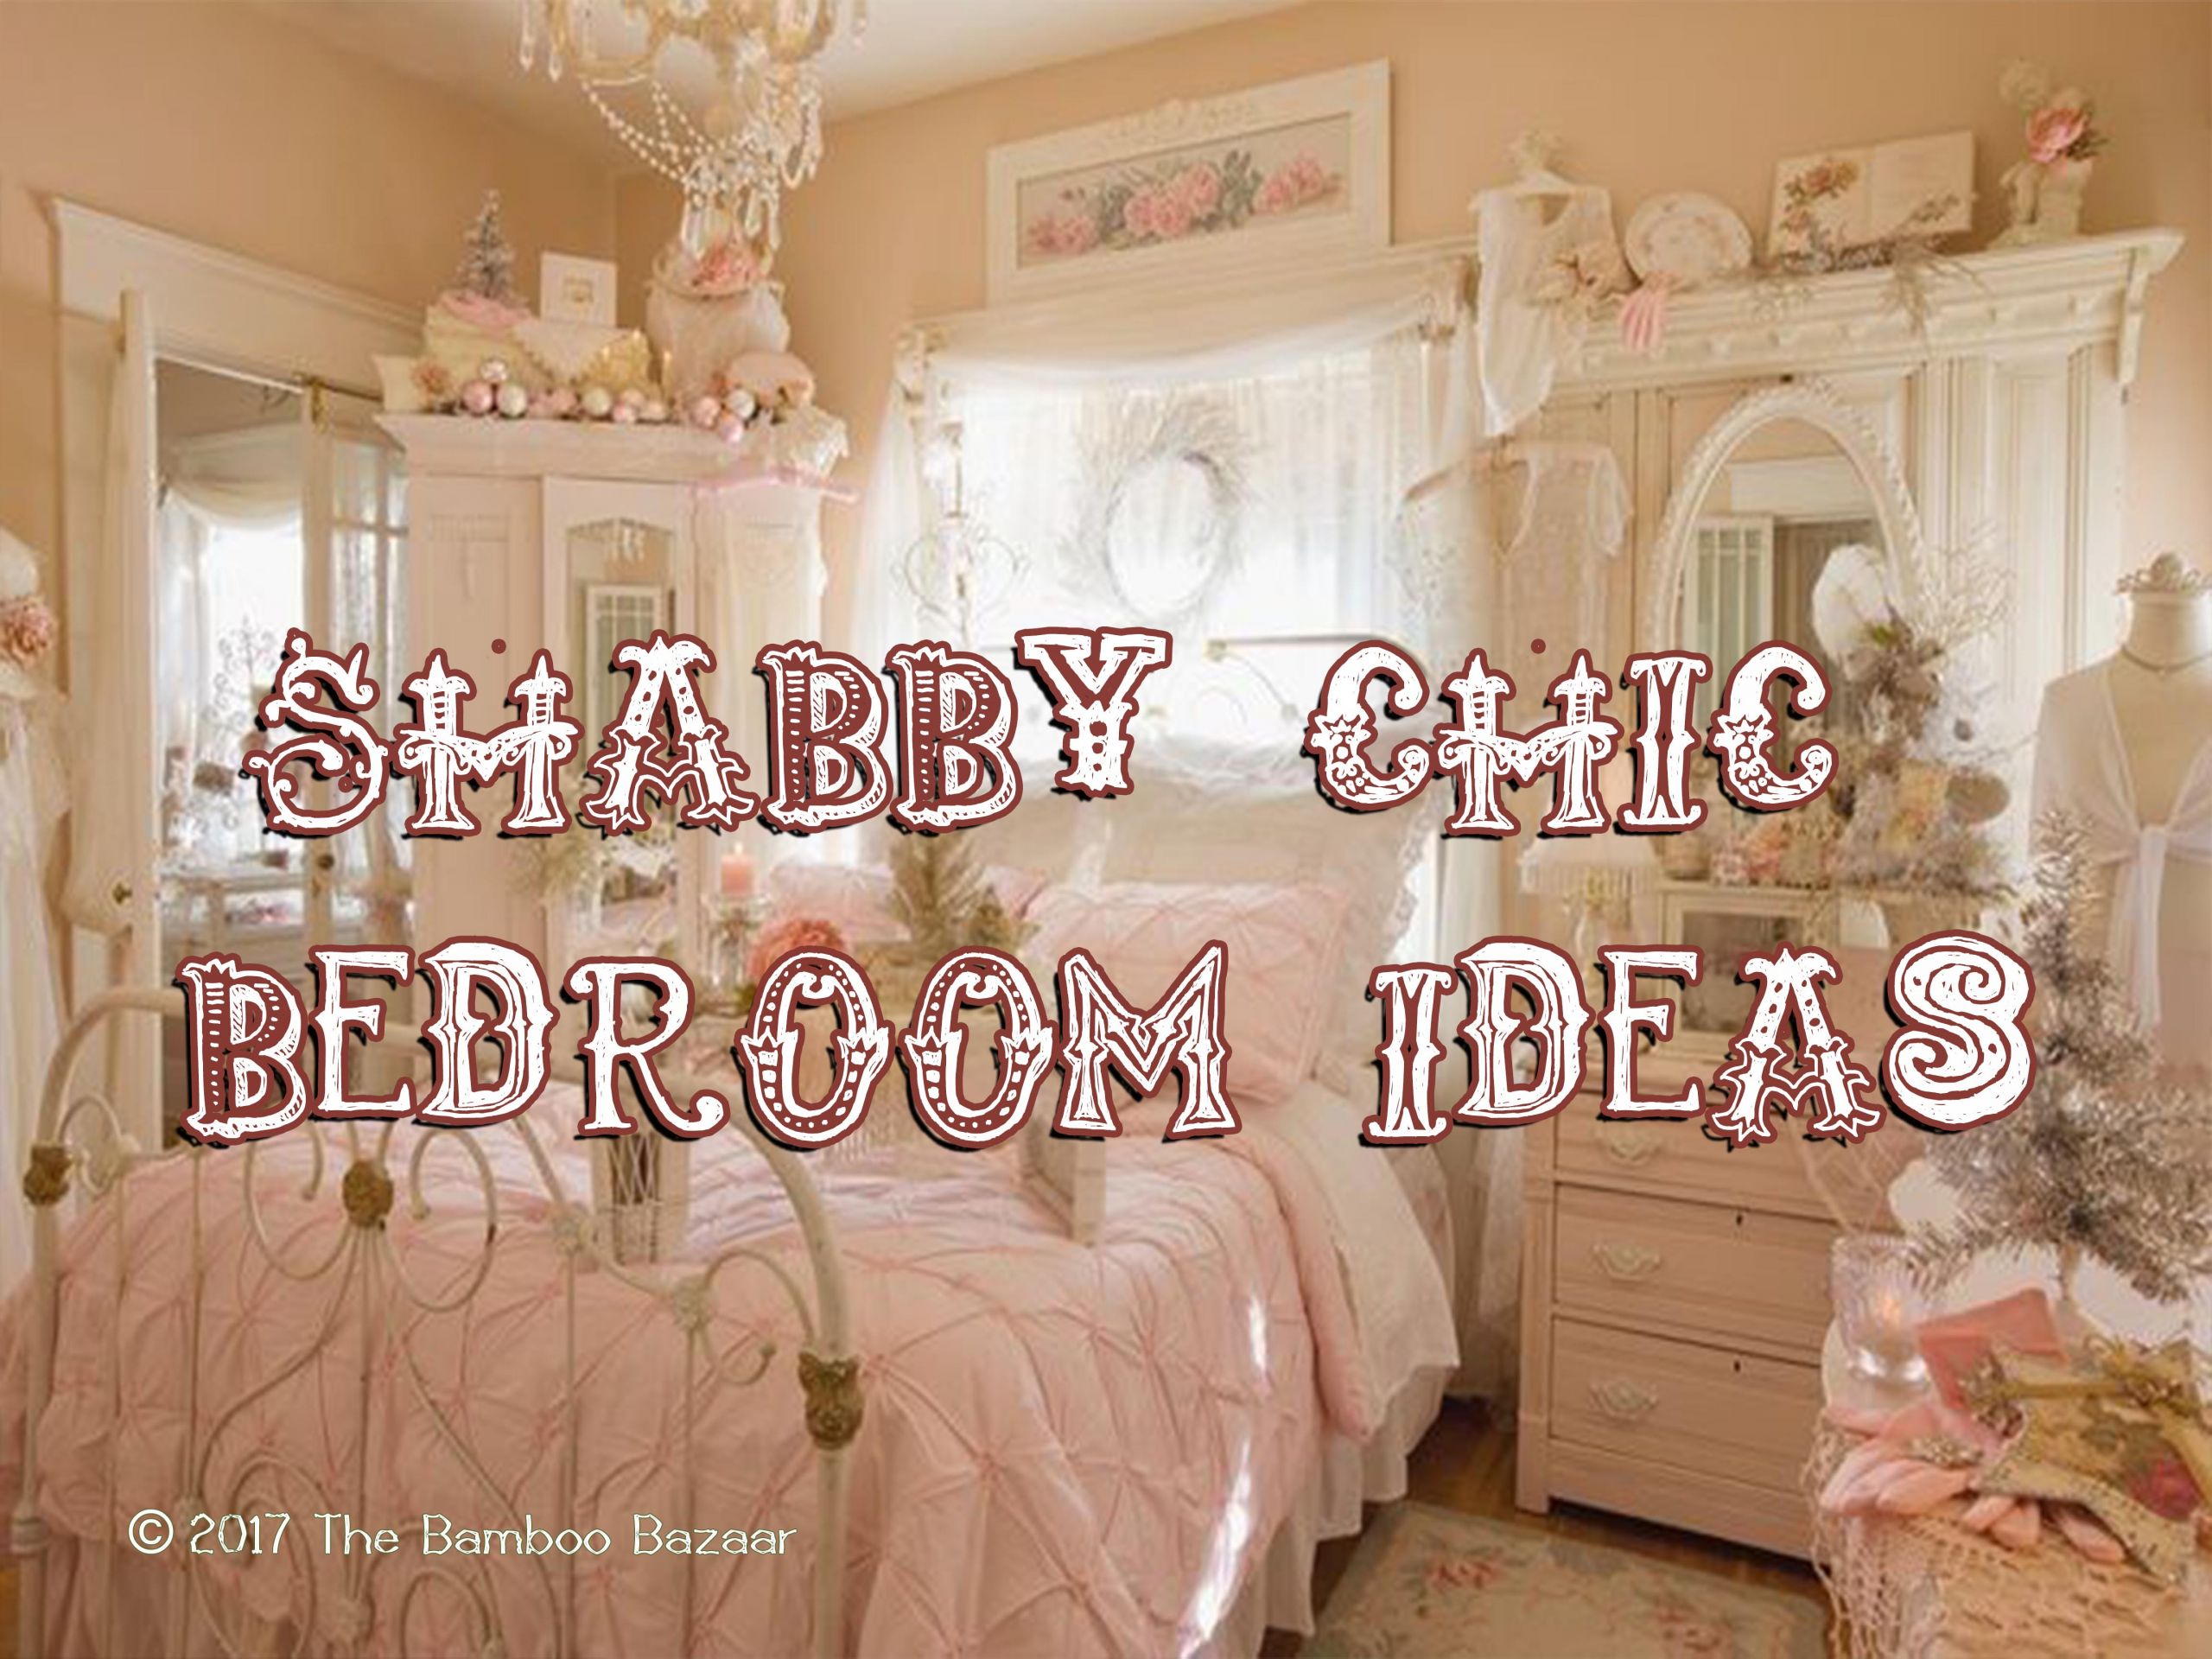 Rustic Shabby Chic Bedroom
 Shabby Chic Bedroom Ideas How to Transform with Vintage style